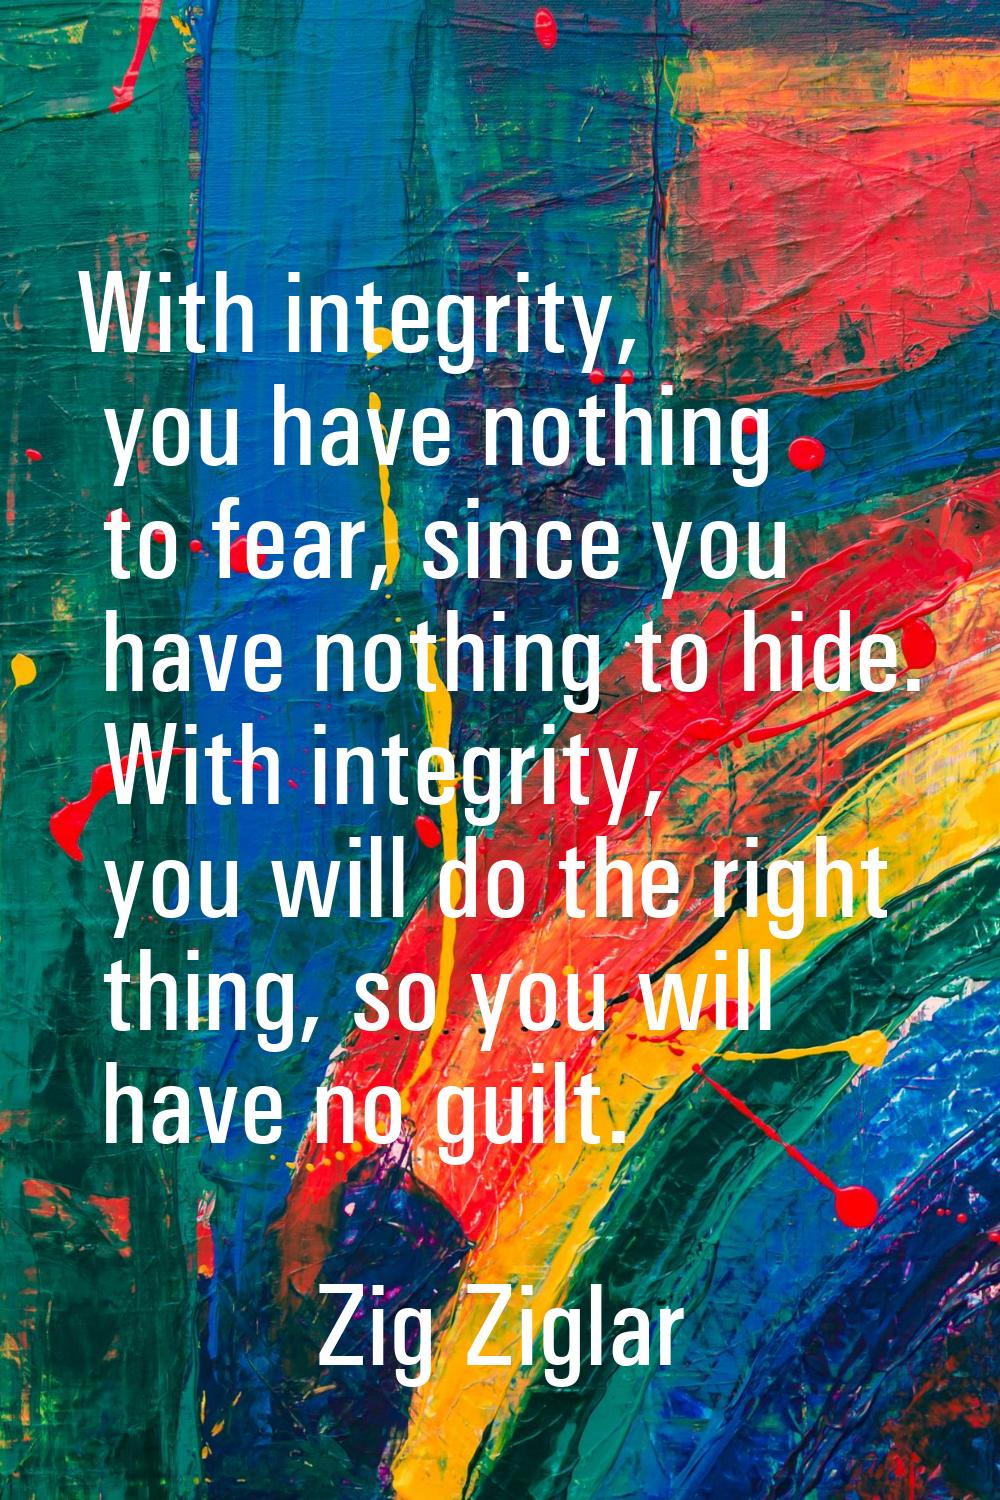 With integrity, you have nothing to fear, since you have nothing to hide. With integrity, you will 